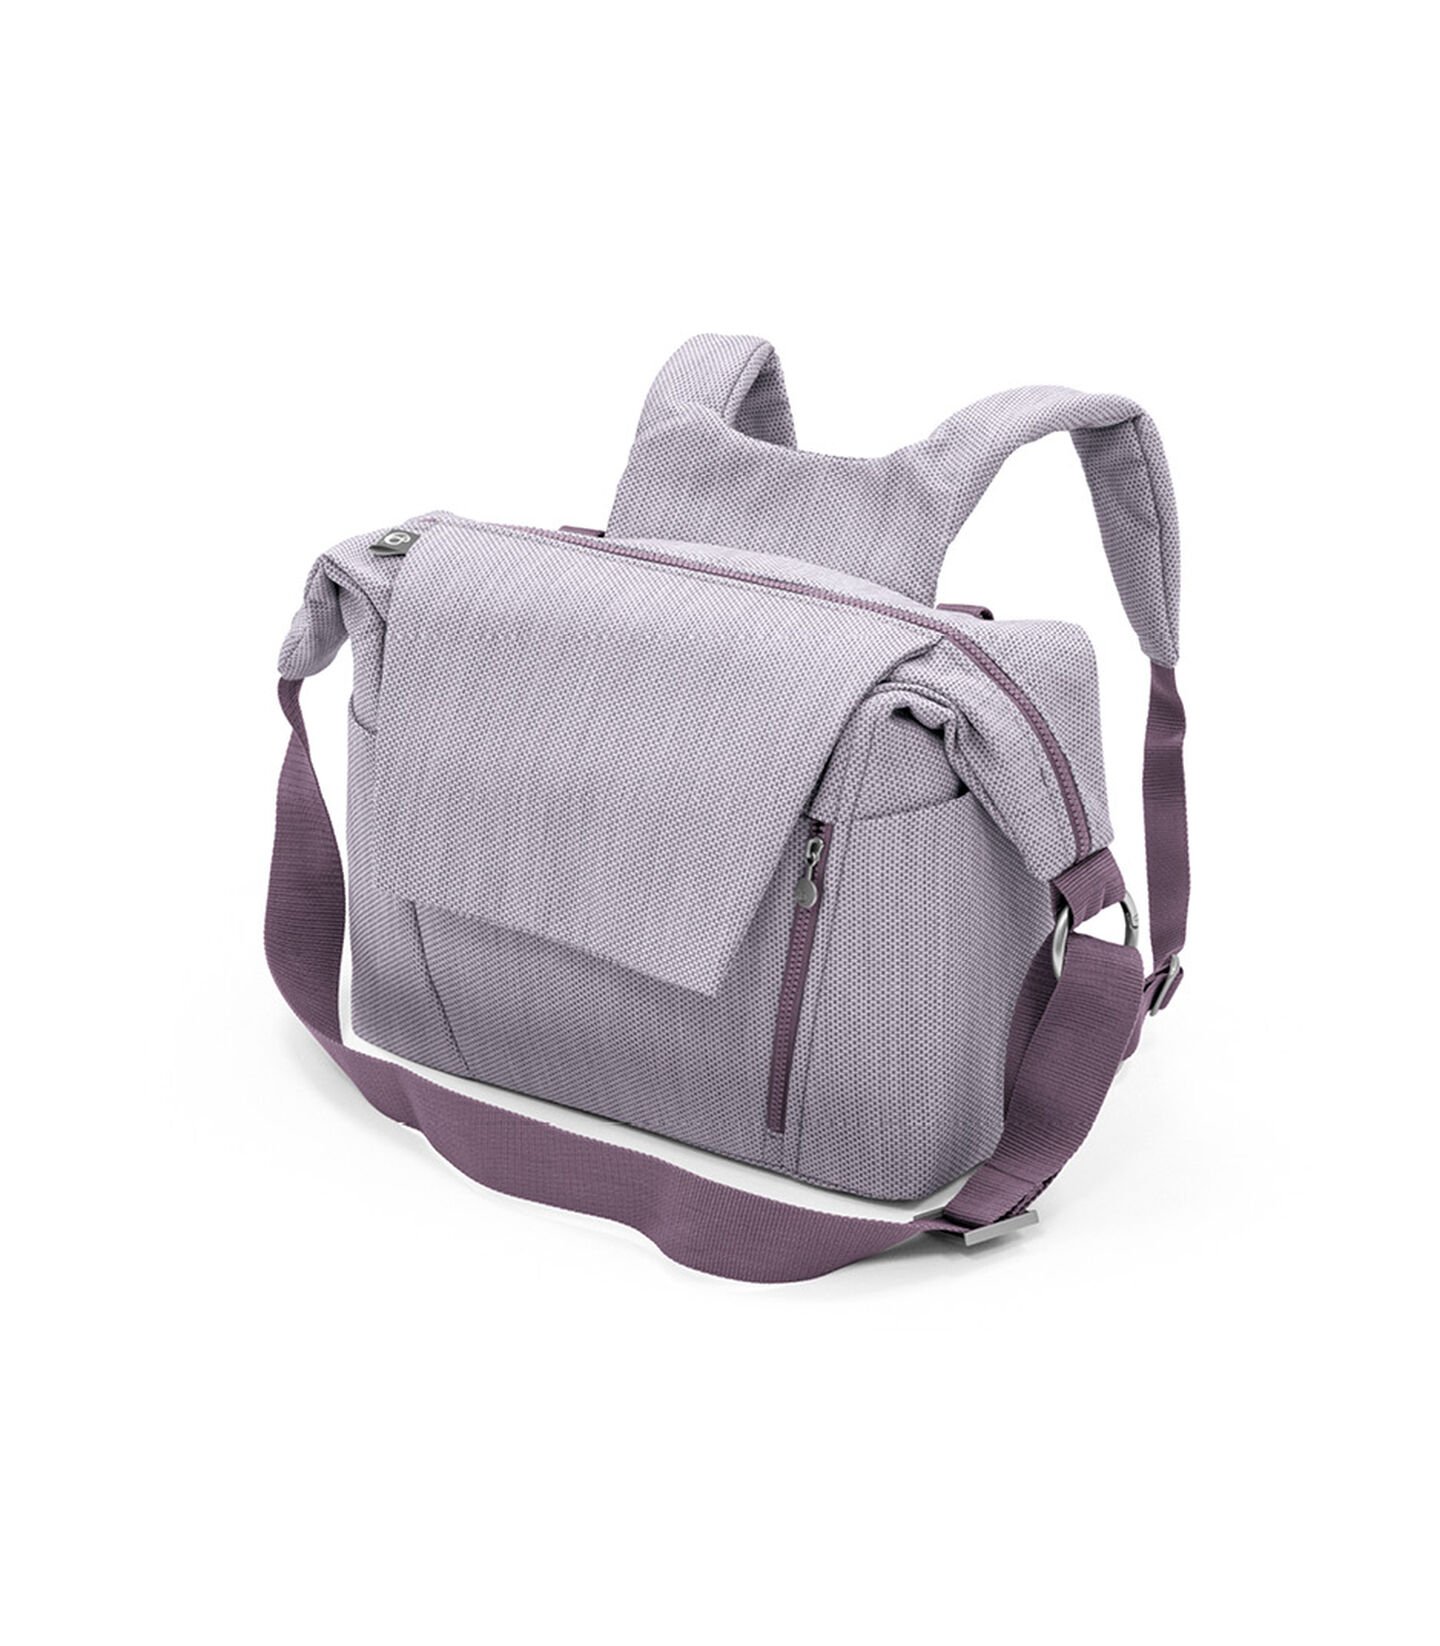 Stokke® Changing bag Brushed Lilac, Brushed Lilac, mainview view 1